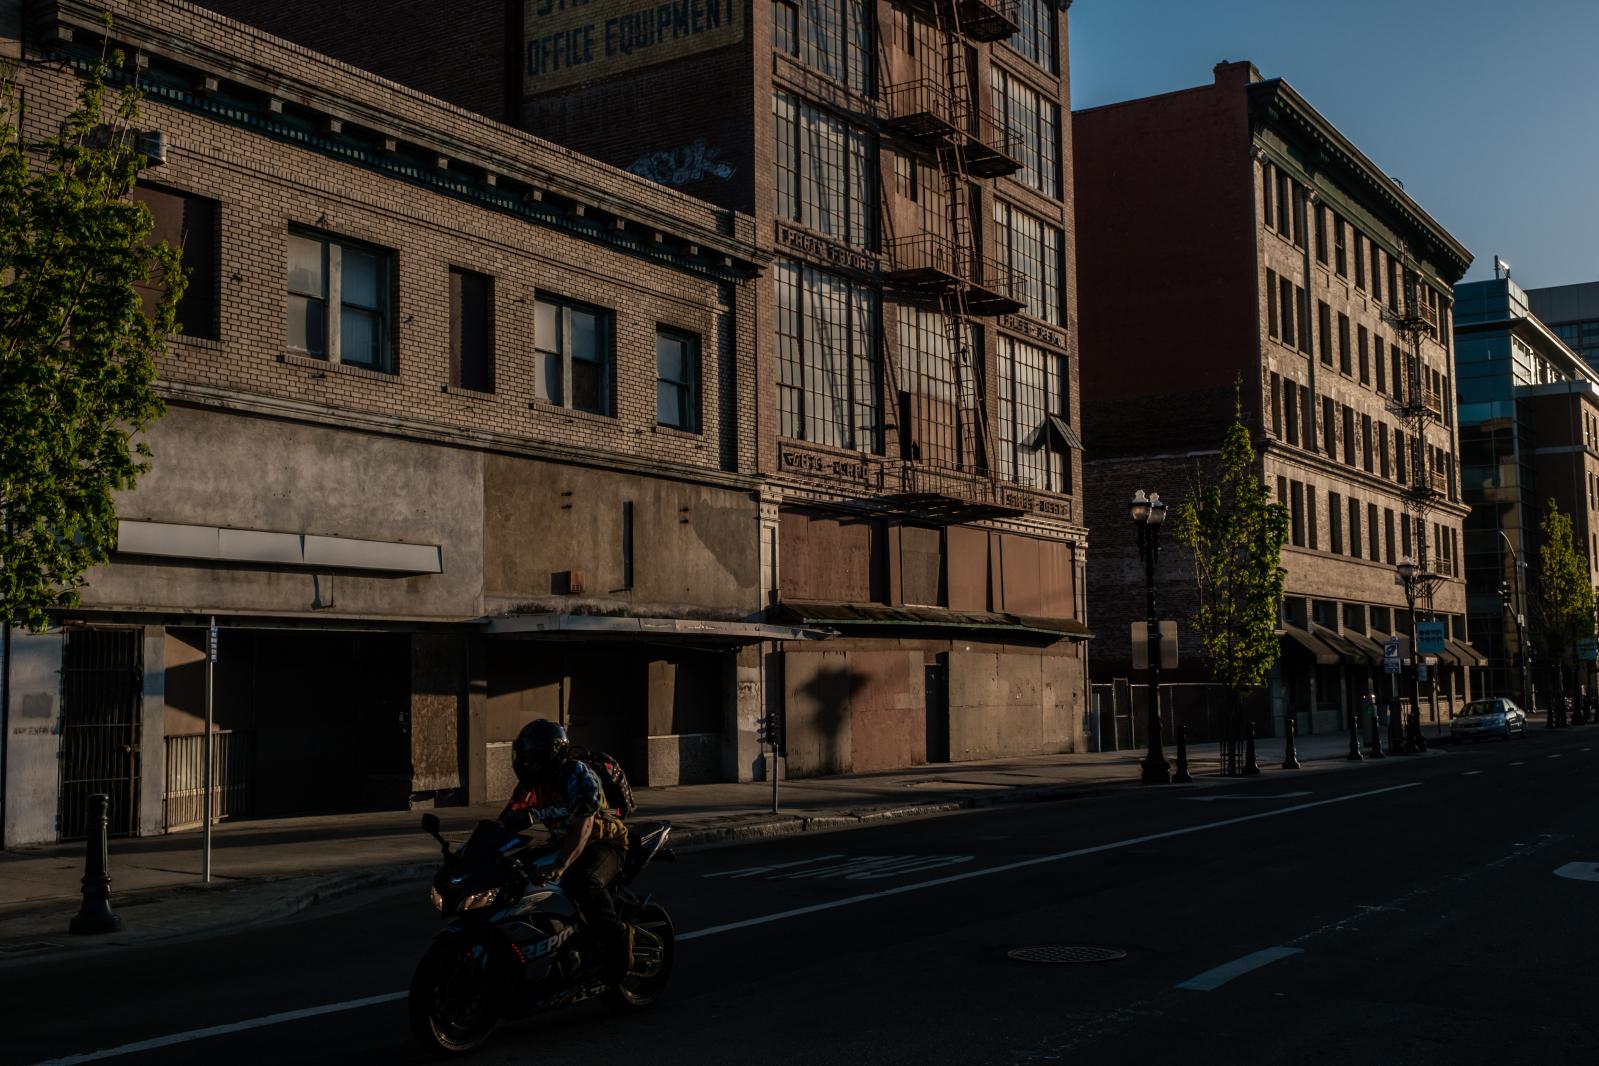 Image from Universal Basic Income: Trying to save a city - STOCKTON, CA - APRIL 5: A motorcyclist is seen riding...